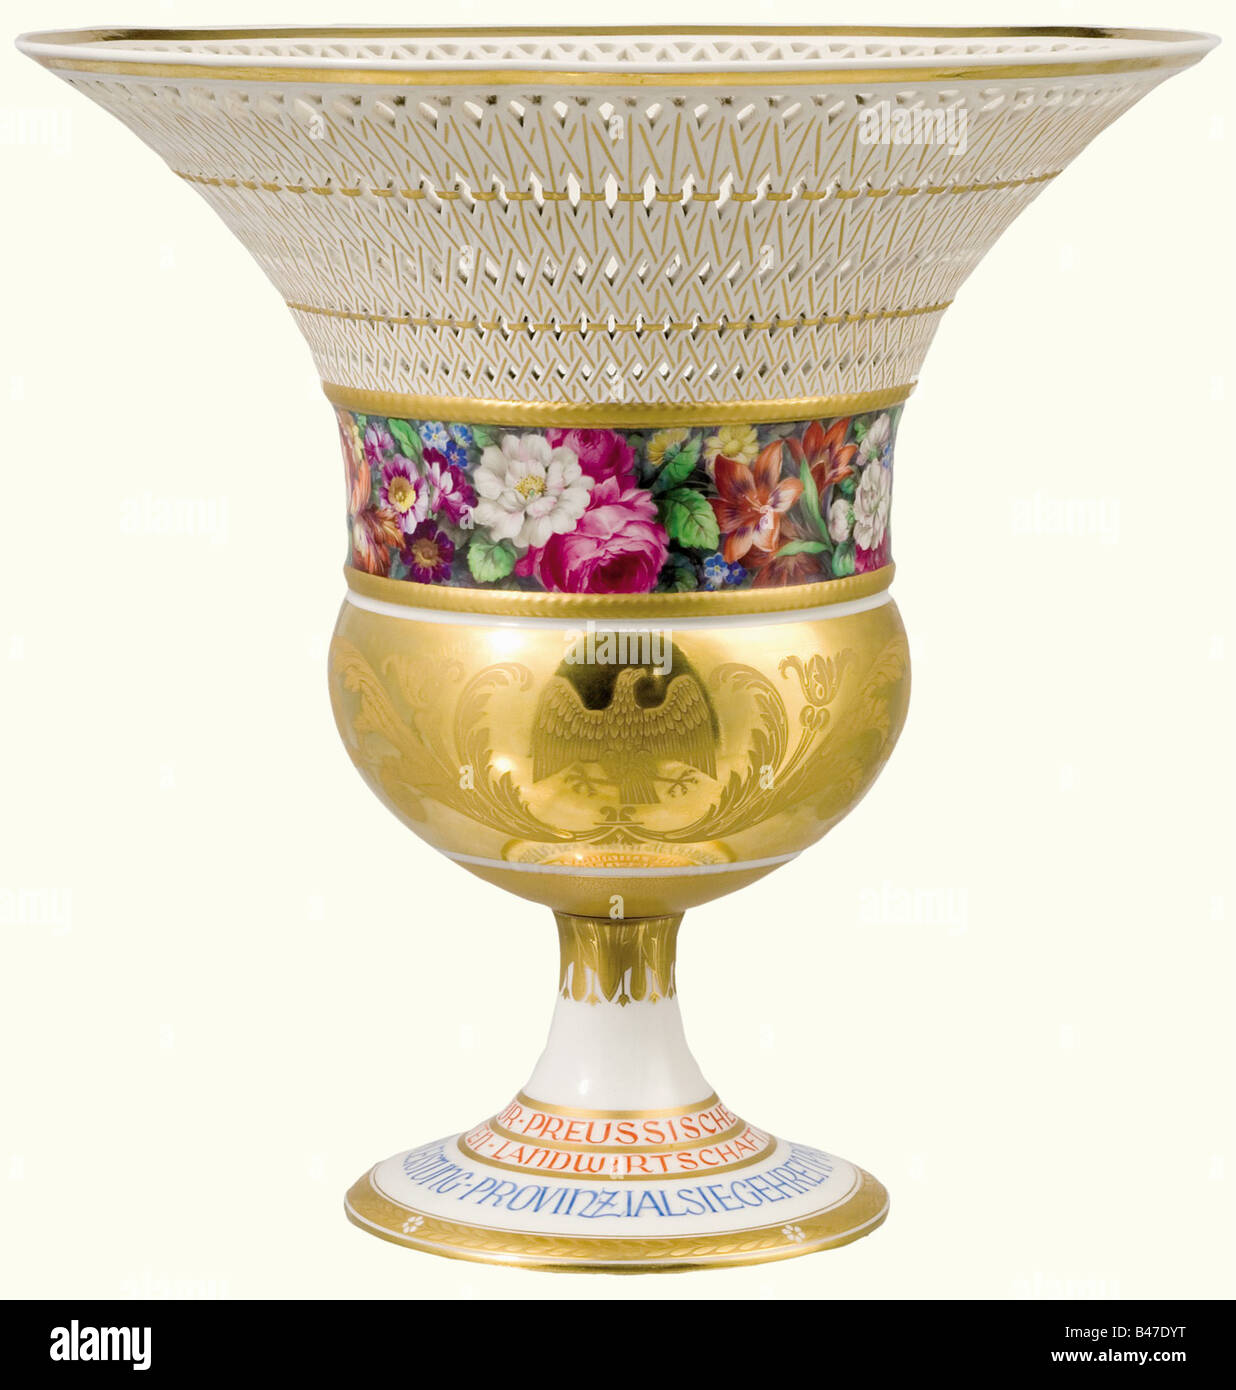 A KPM (Royal Porcelain Manufacture) vase and award certificate - Prussian  Provincial First Price 1932., The vase after a Schinkel design, the  so-called "Schinkel Basket". White porcelain. The cup with a Prussian